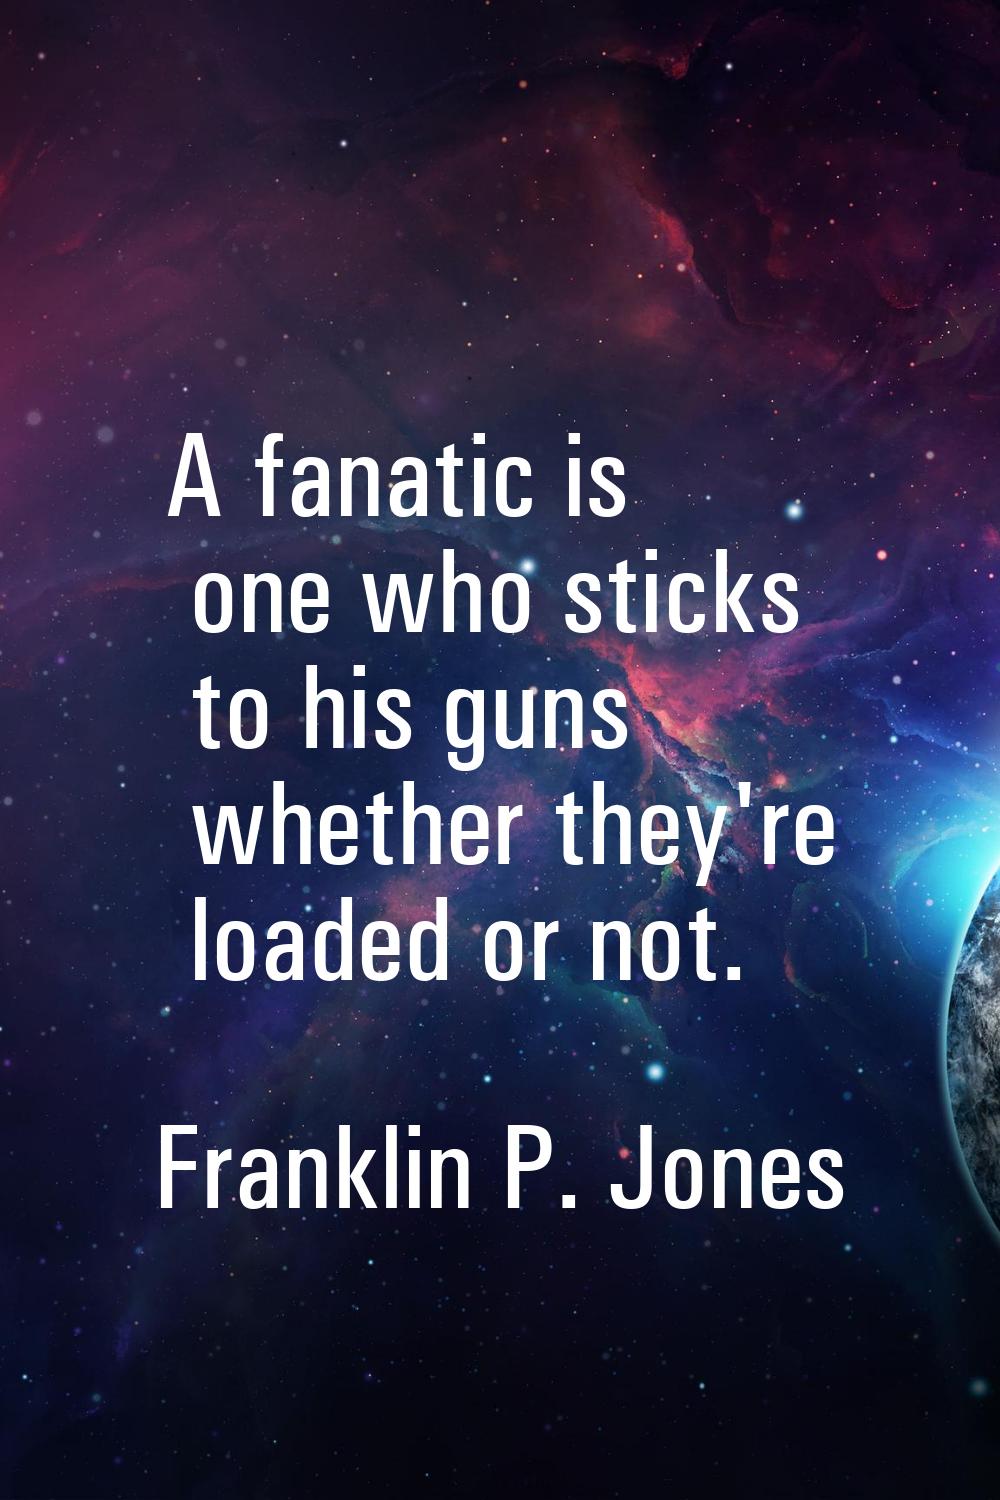 A fanatic is one who sticks to his guns whether they're loaded or not.